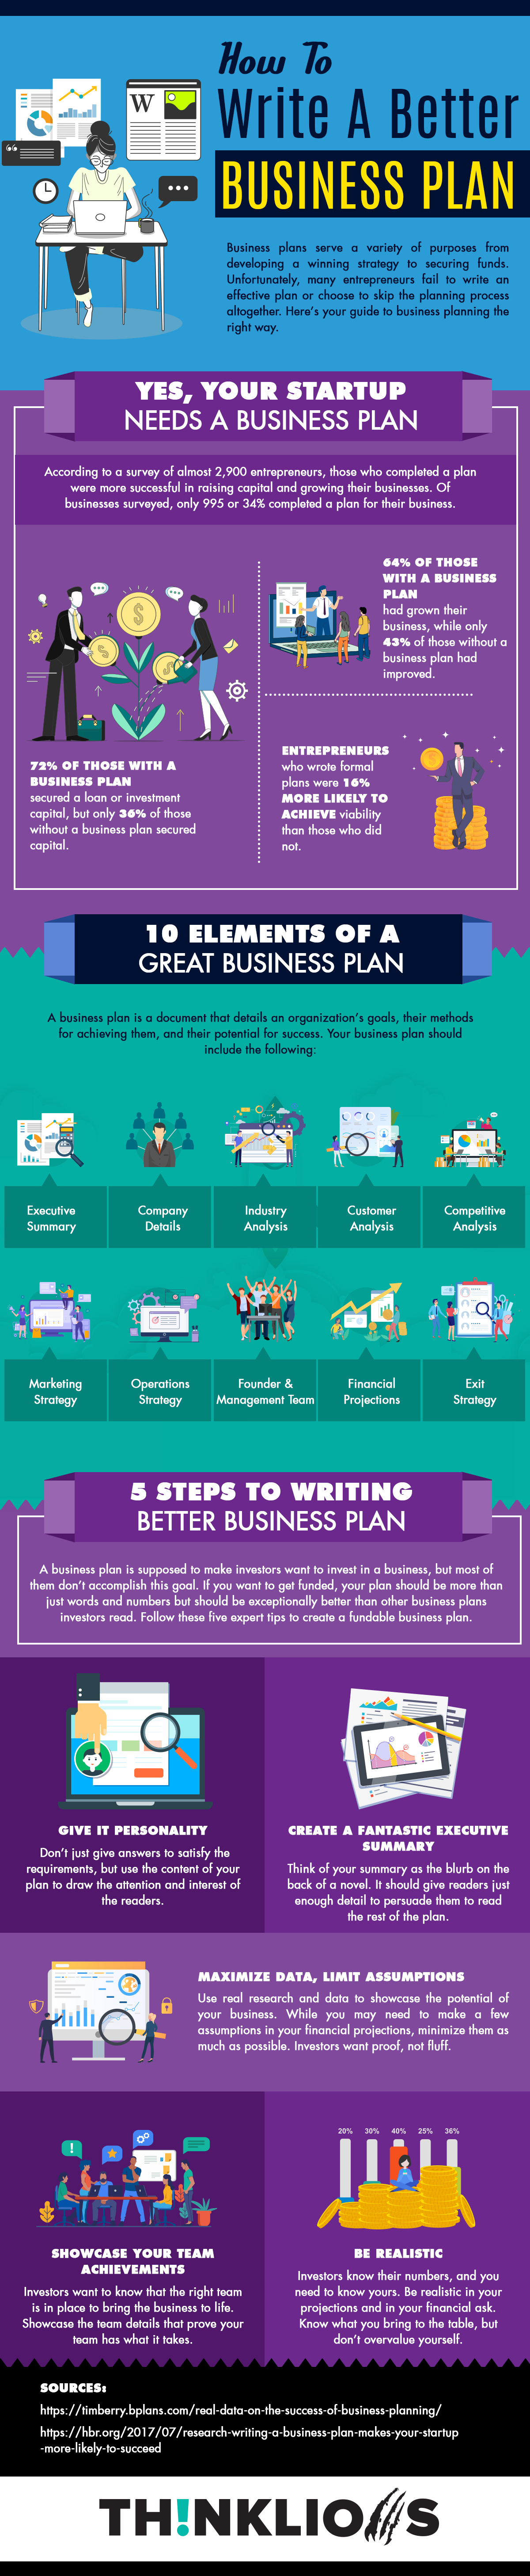 How to write a better business plan infographic